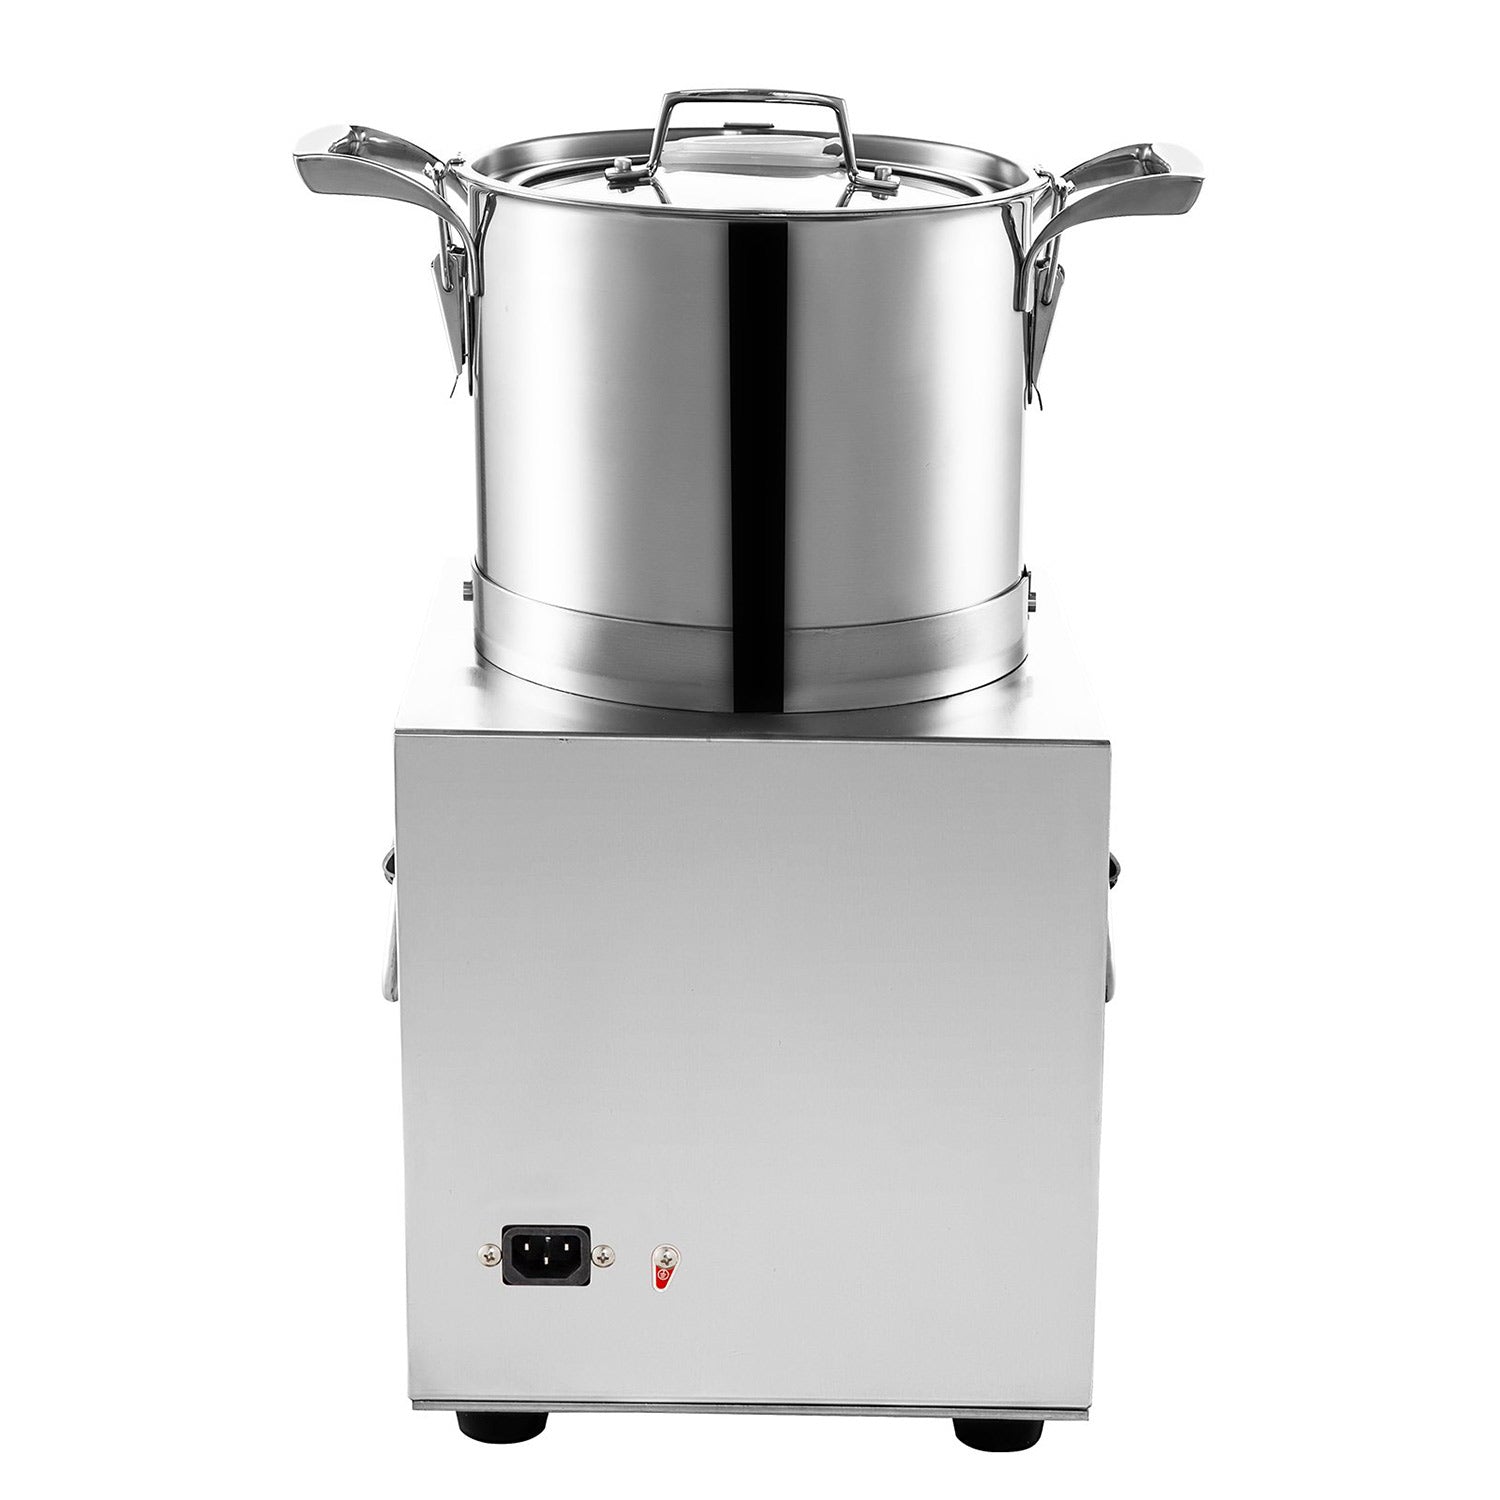 A-QS804 Food Chopper | 4 L | Electric Food Processor | Stainless Steel | 1400RPM Motor | Wide Application